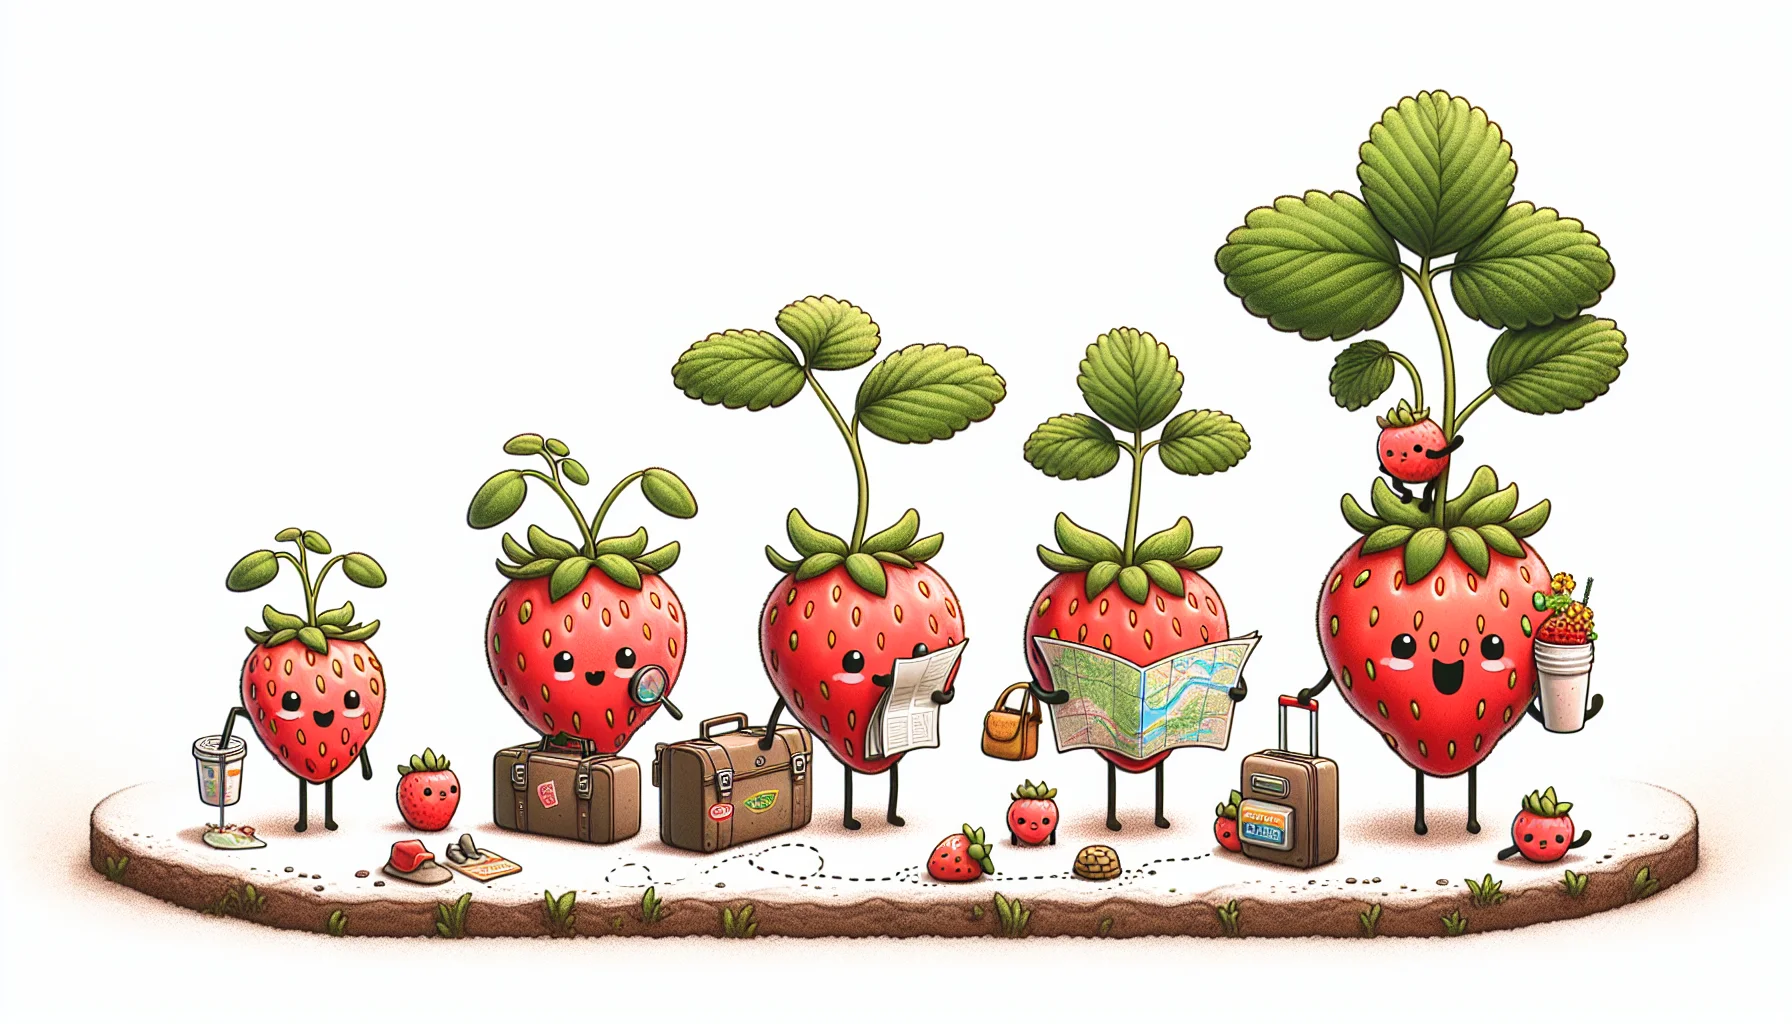 Depict a humorous and engaging scene that inspires people to indulge in gardening. In the middle, show a row of cute strawberries growing from seedlings to fully ripe fruit. Each stage of growth is characterized like a journey with the smallest seedling packing a suitcase to start its adventure, a middle-sized sapling reading a map, and the largest mature fruit digging into a mini cooler for a much-deserved picnic treat.